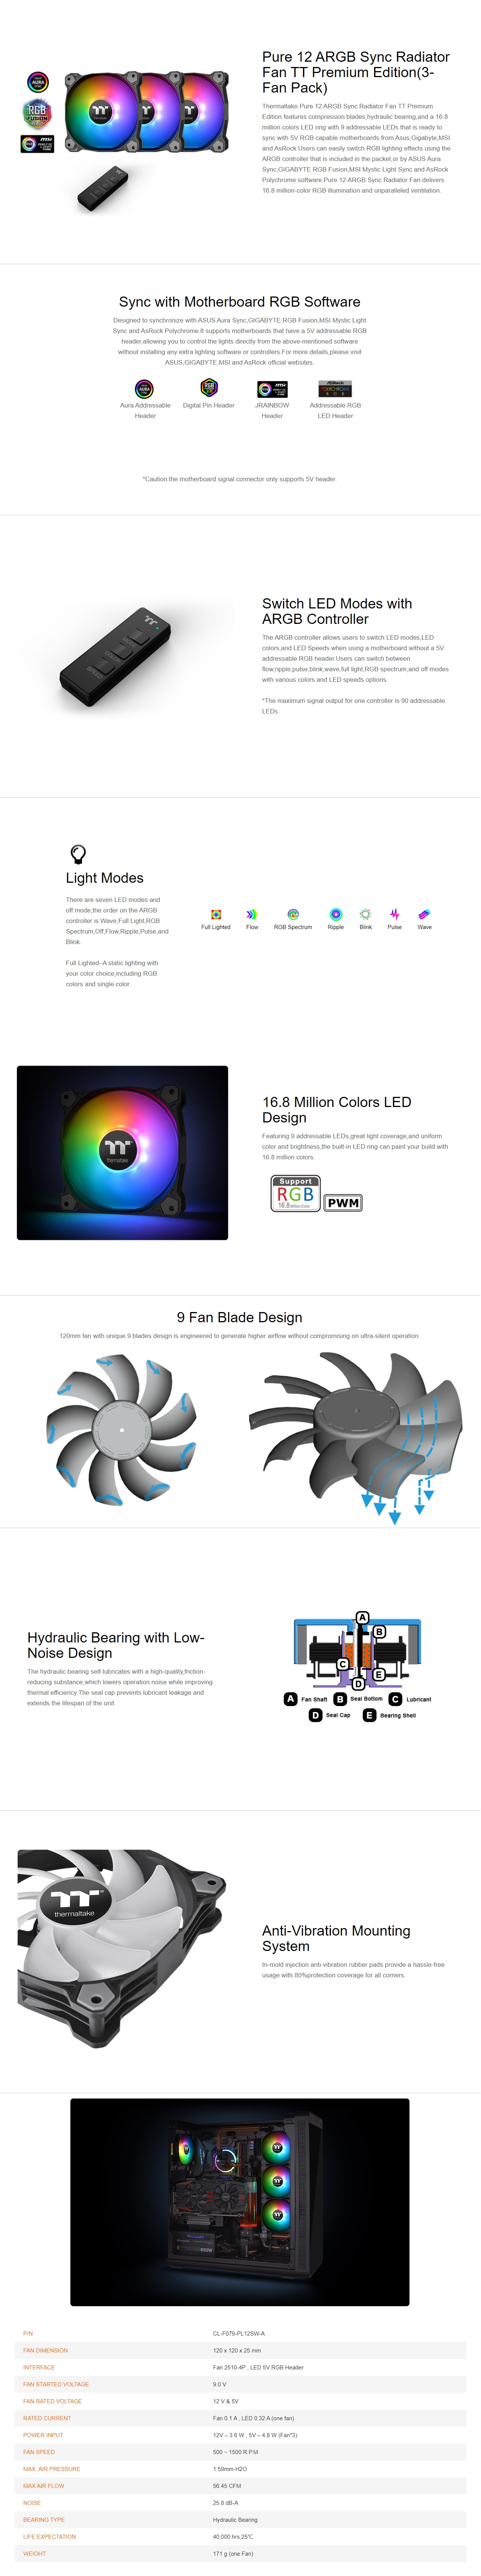 A large marketing image providing additional information about the product Thermaltake Pure 12 ARGB - 120mm Radiator Fan (3 Pack) - Additional alt info not provided